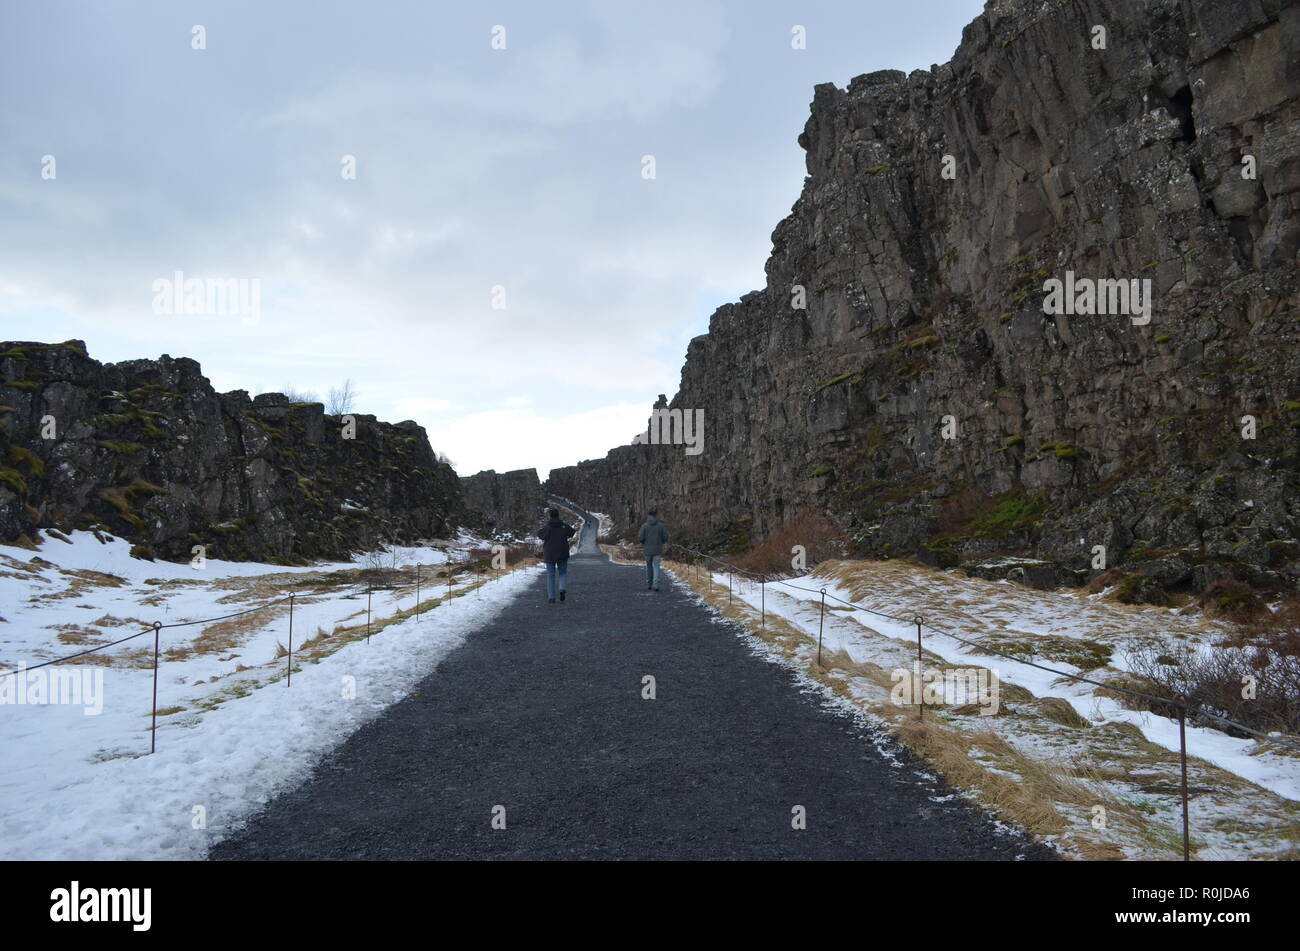 Iceland tectonic plates view in snow Stock Photo